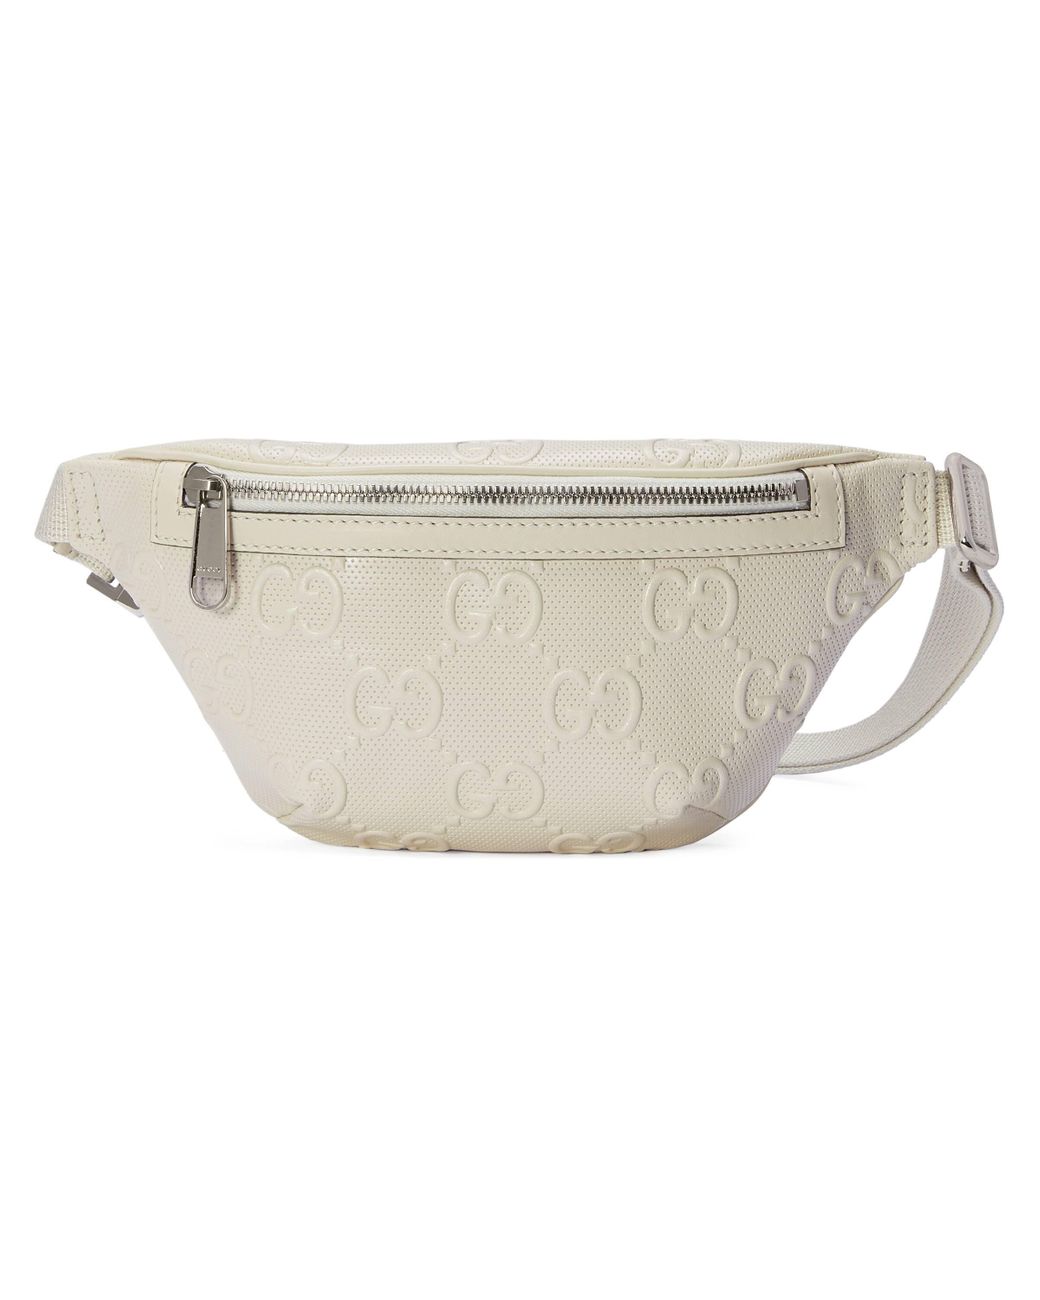 Gucci Leather GG Embossed Belt Bag in White for Men - Lyst